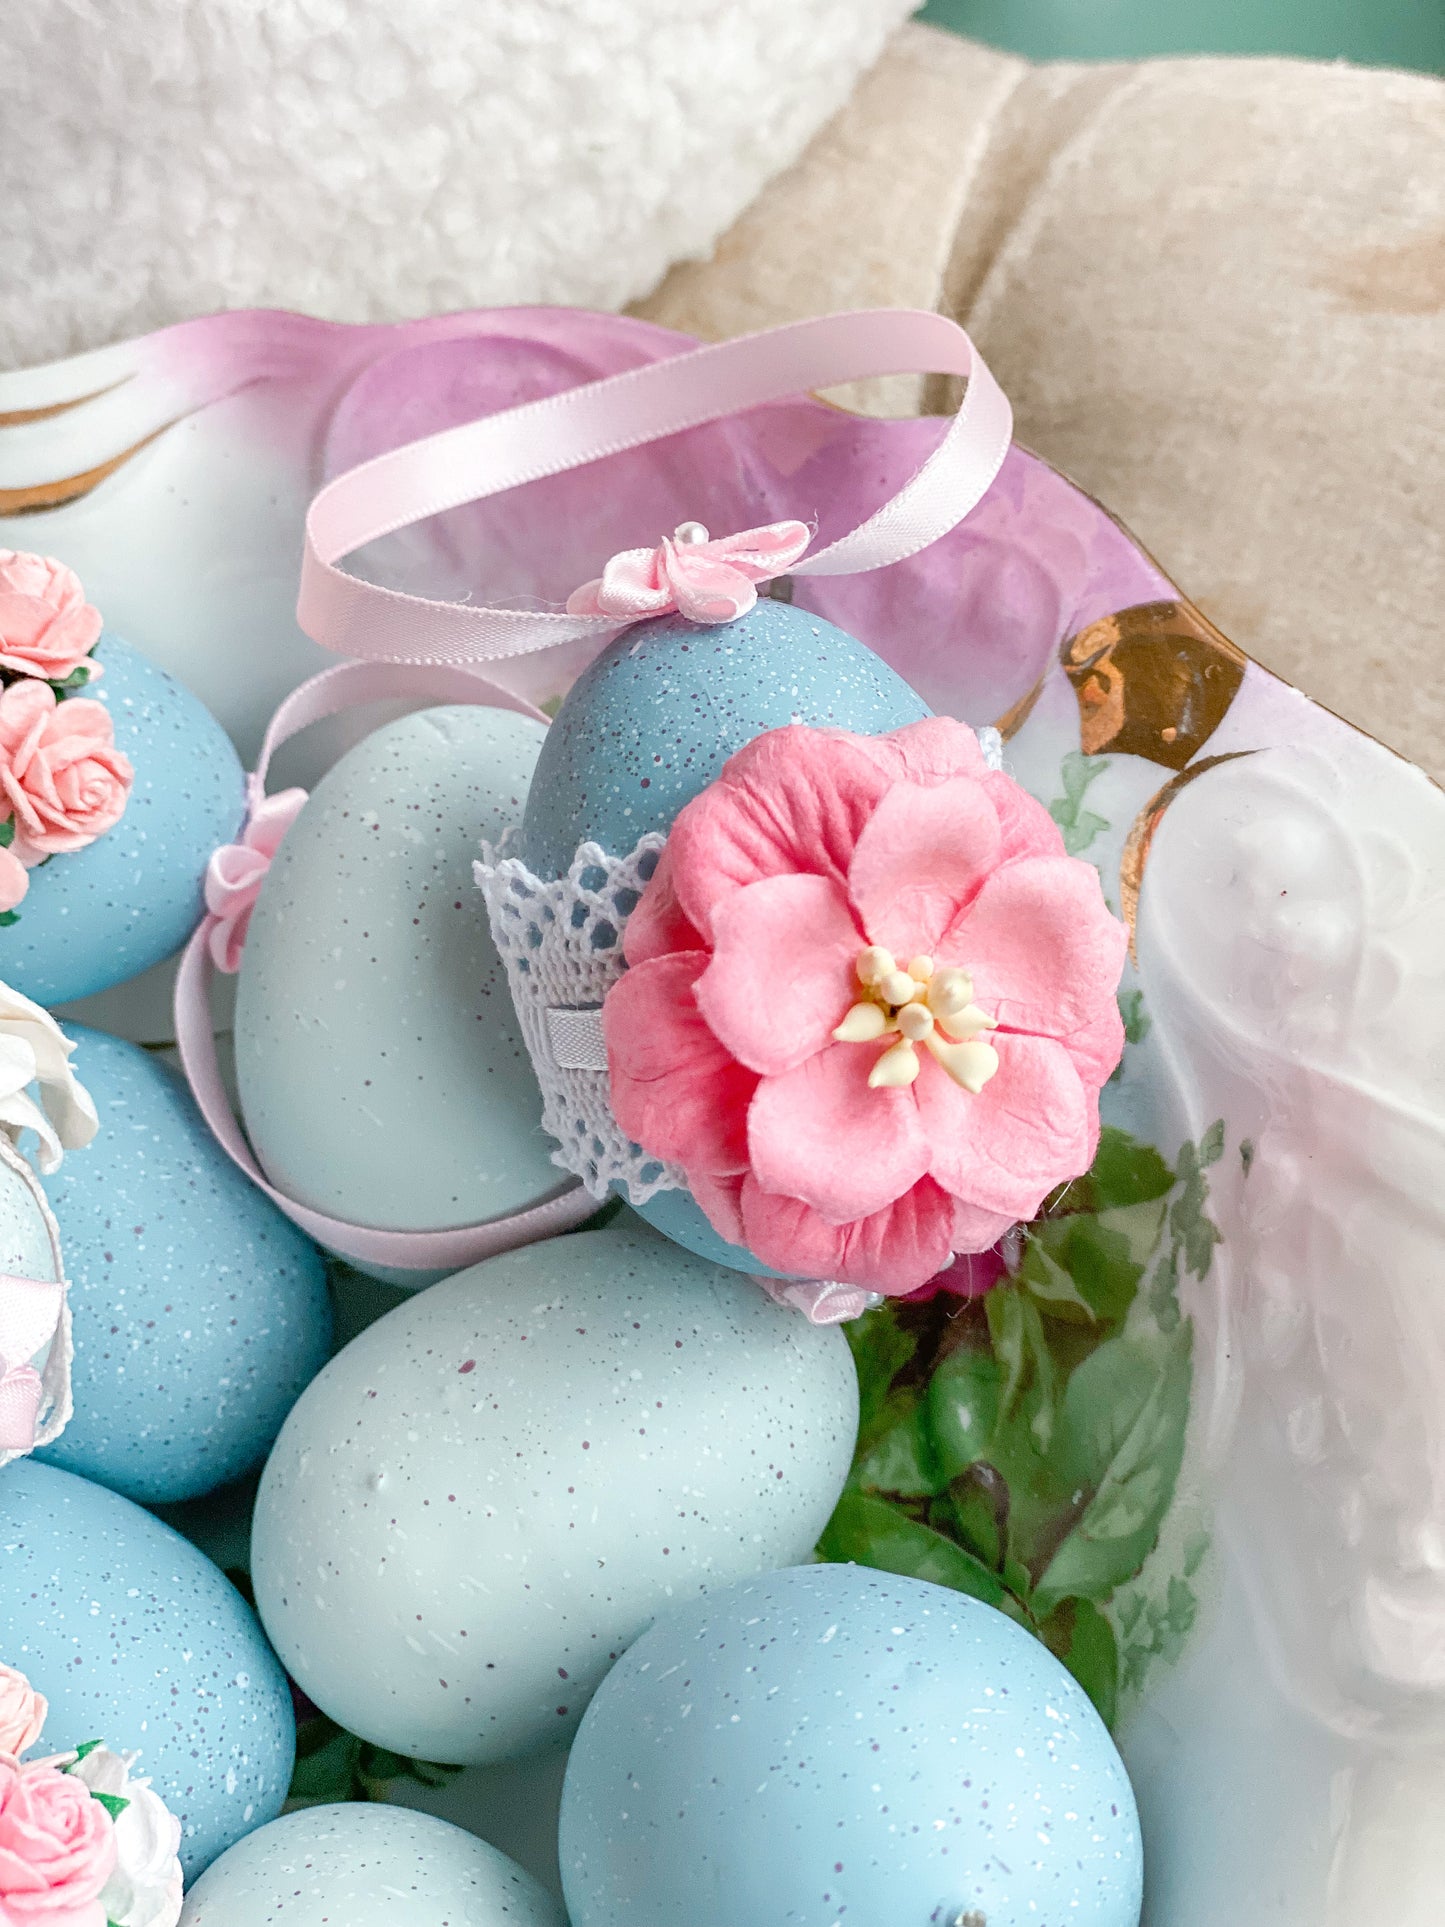 Set of 4 Bespoke Handmade Shabby Chic Pastel Blue and Pink Egg Ornaments